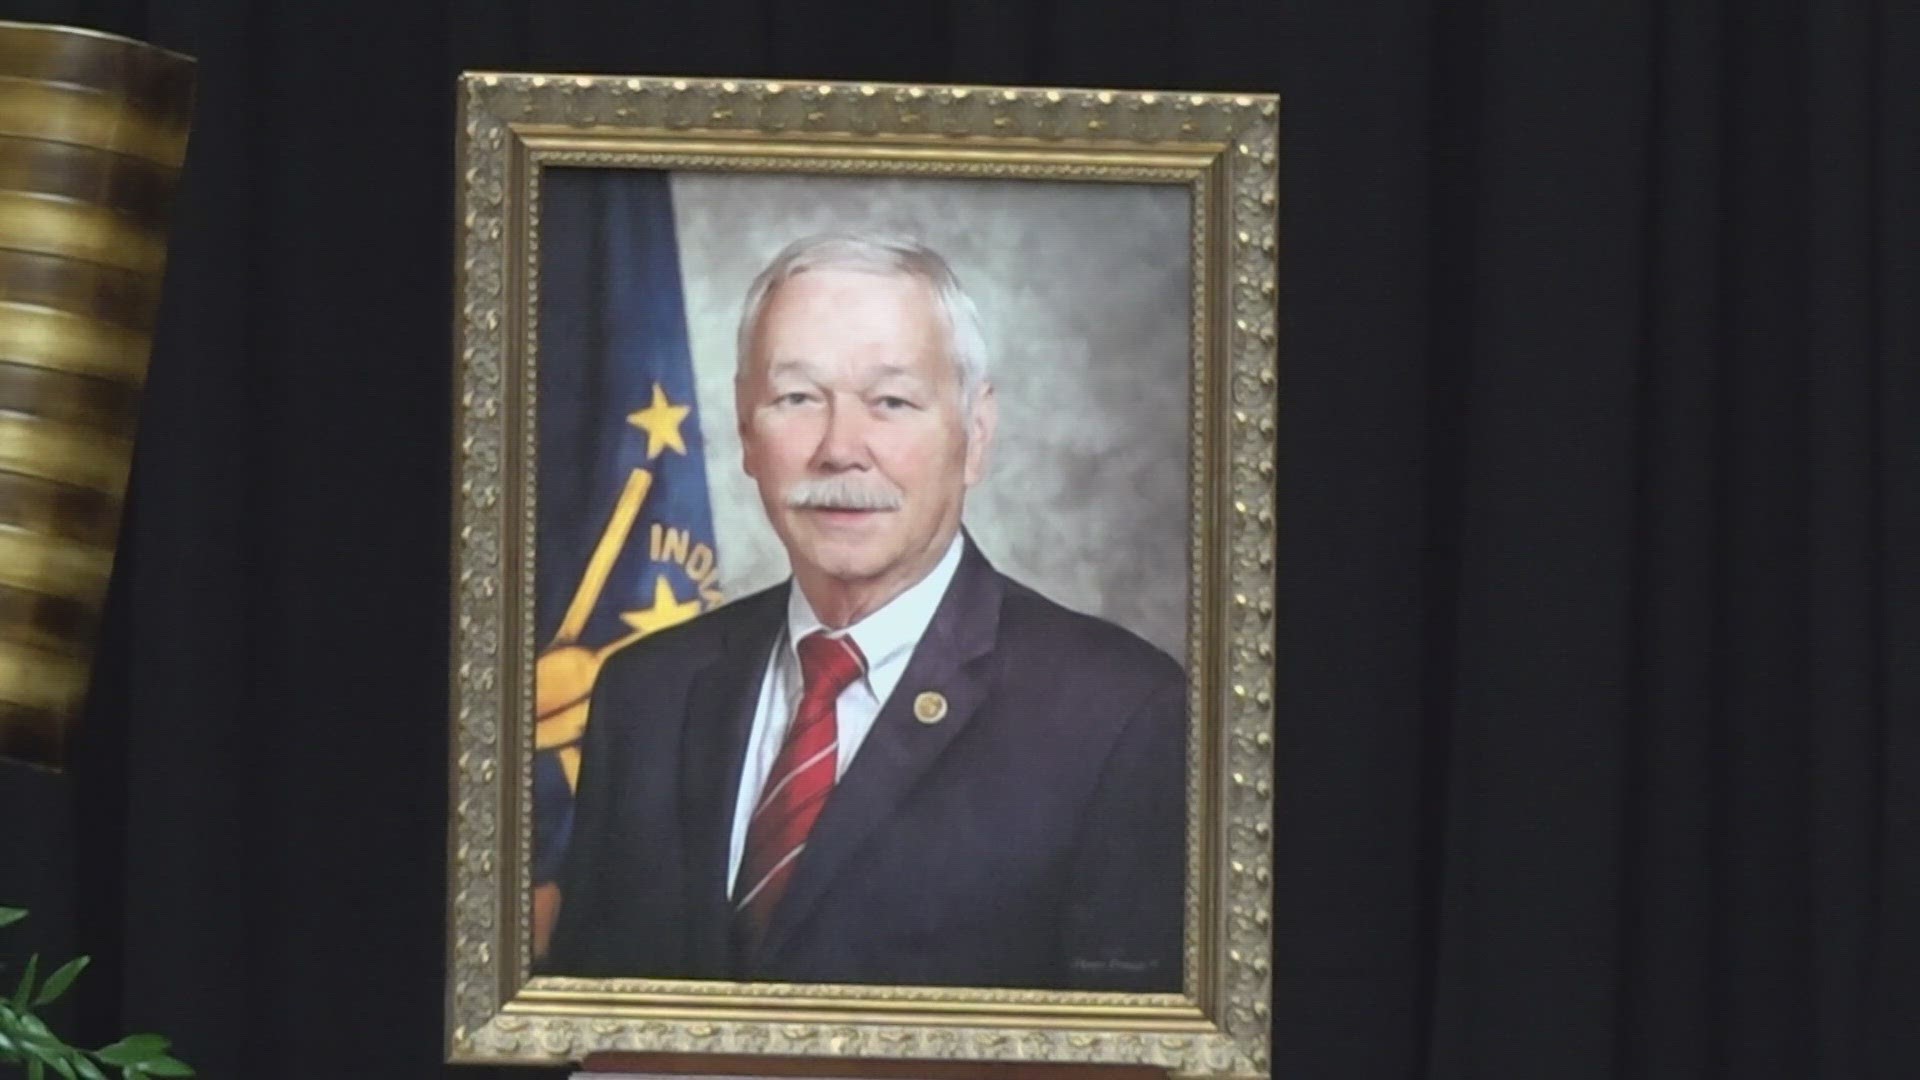 The caucus will fill the seat left vacant by the death of Sen. Jack Sandlin, who died unexpectedly last month at the age of 72.